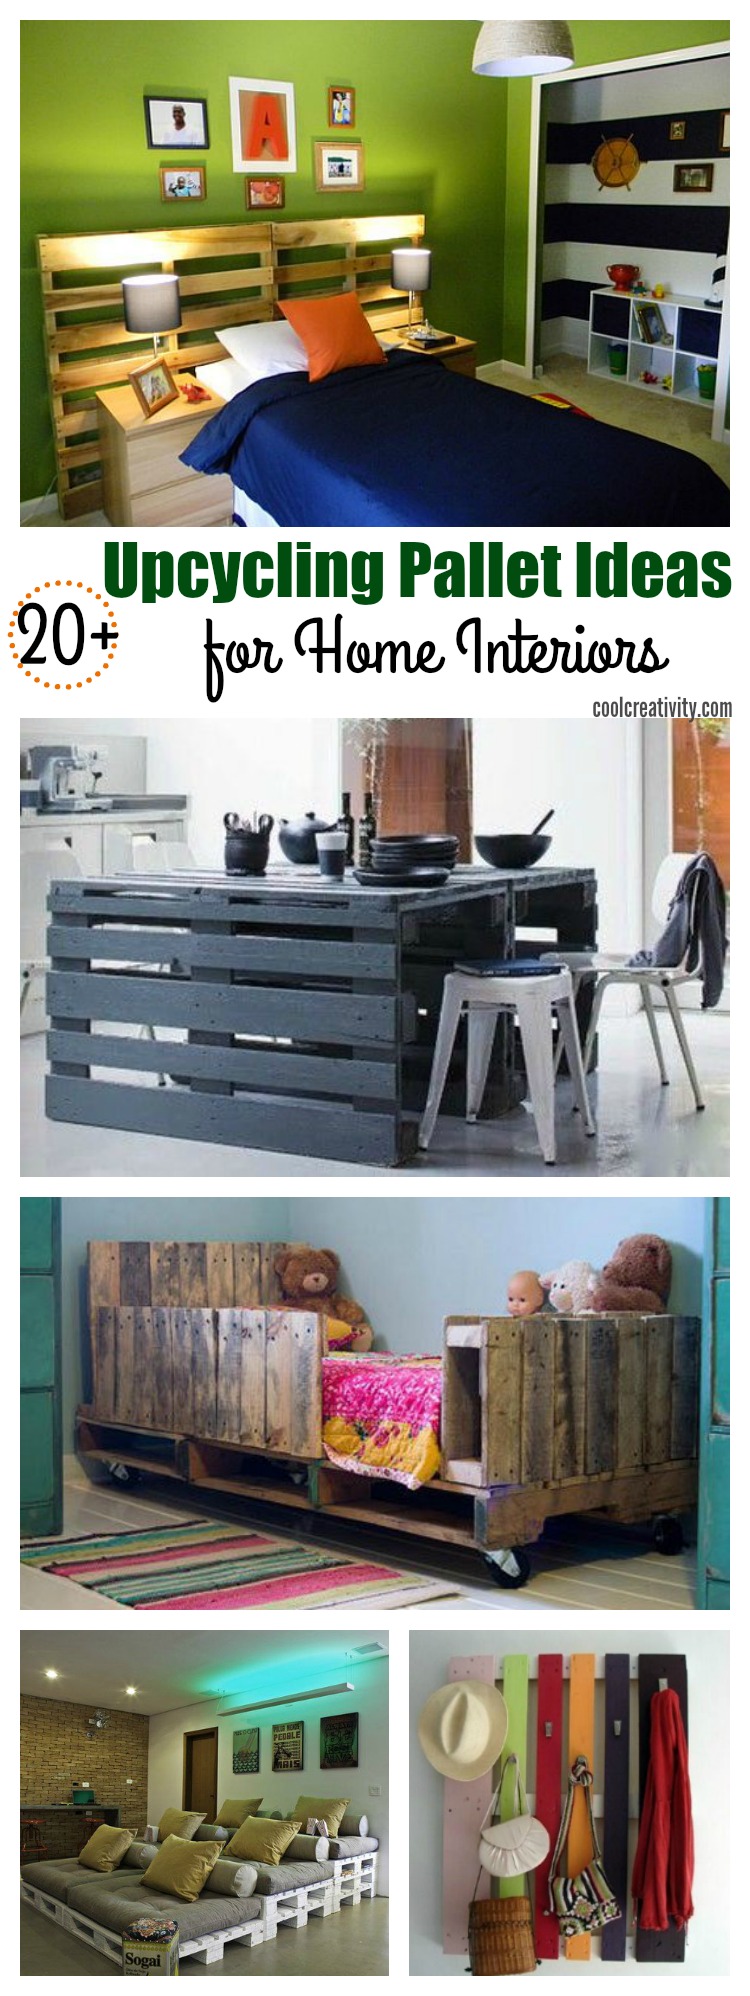 20+ Upcycling Pallet Ideas for Home Interiors p